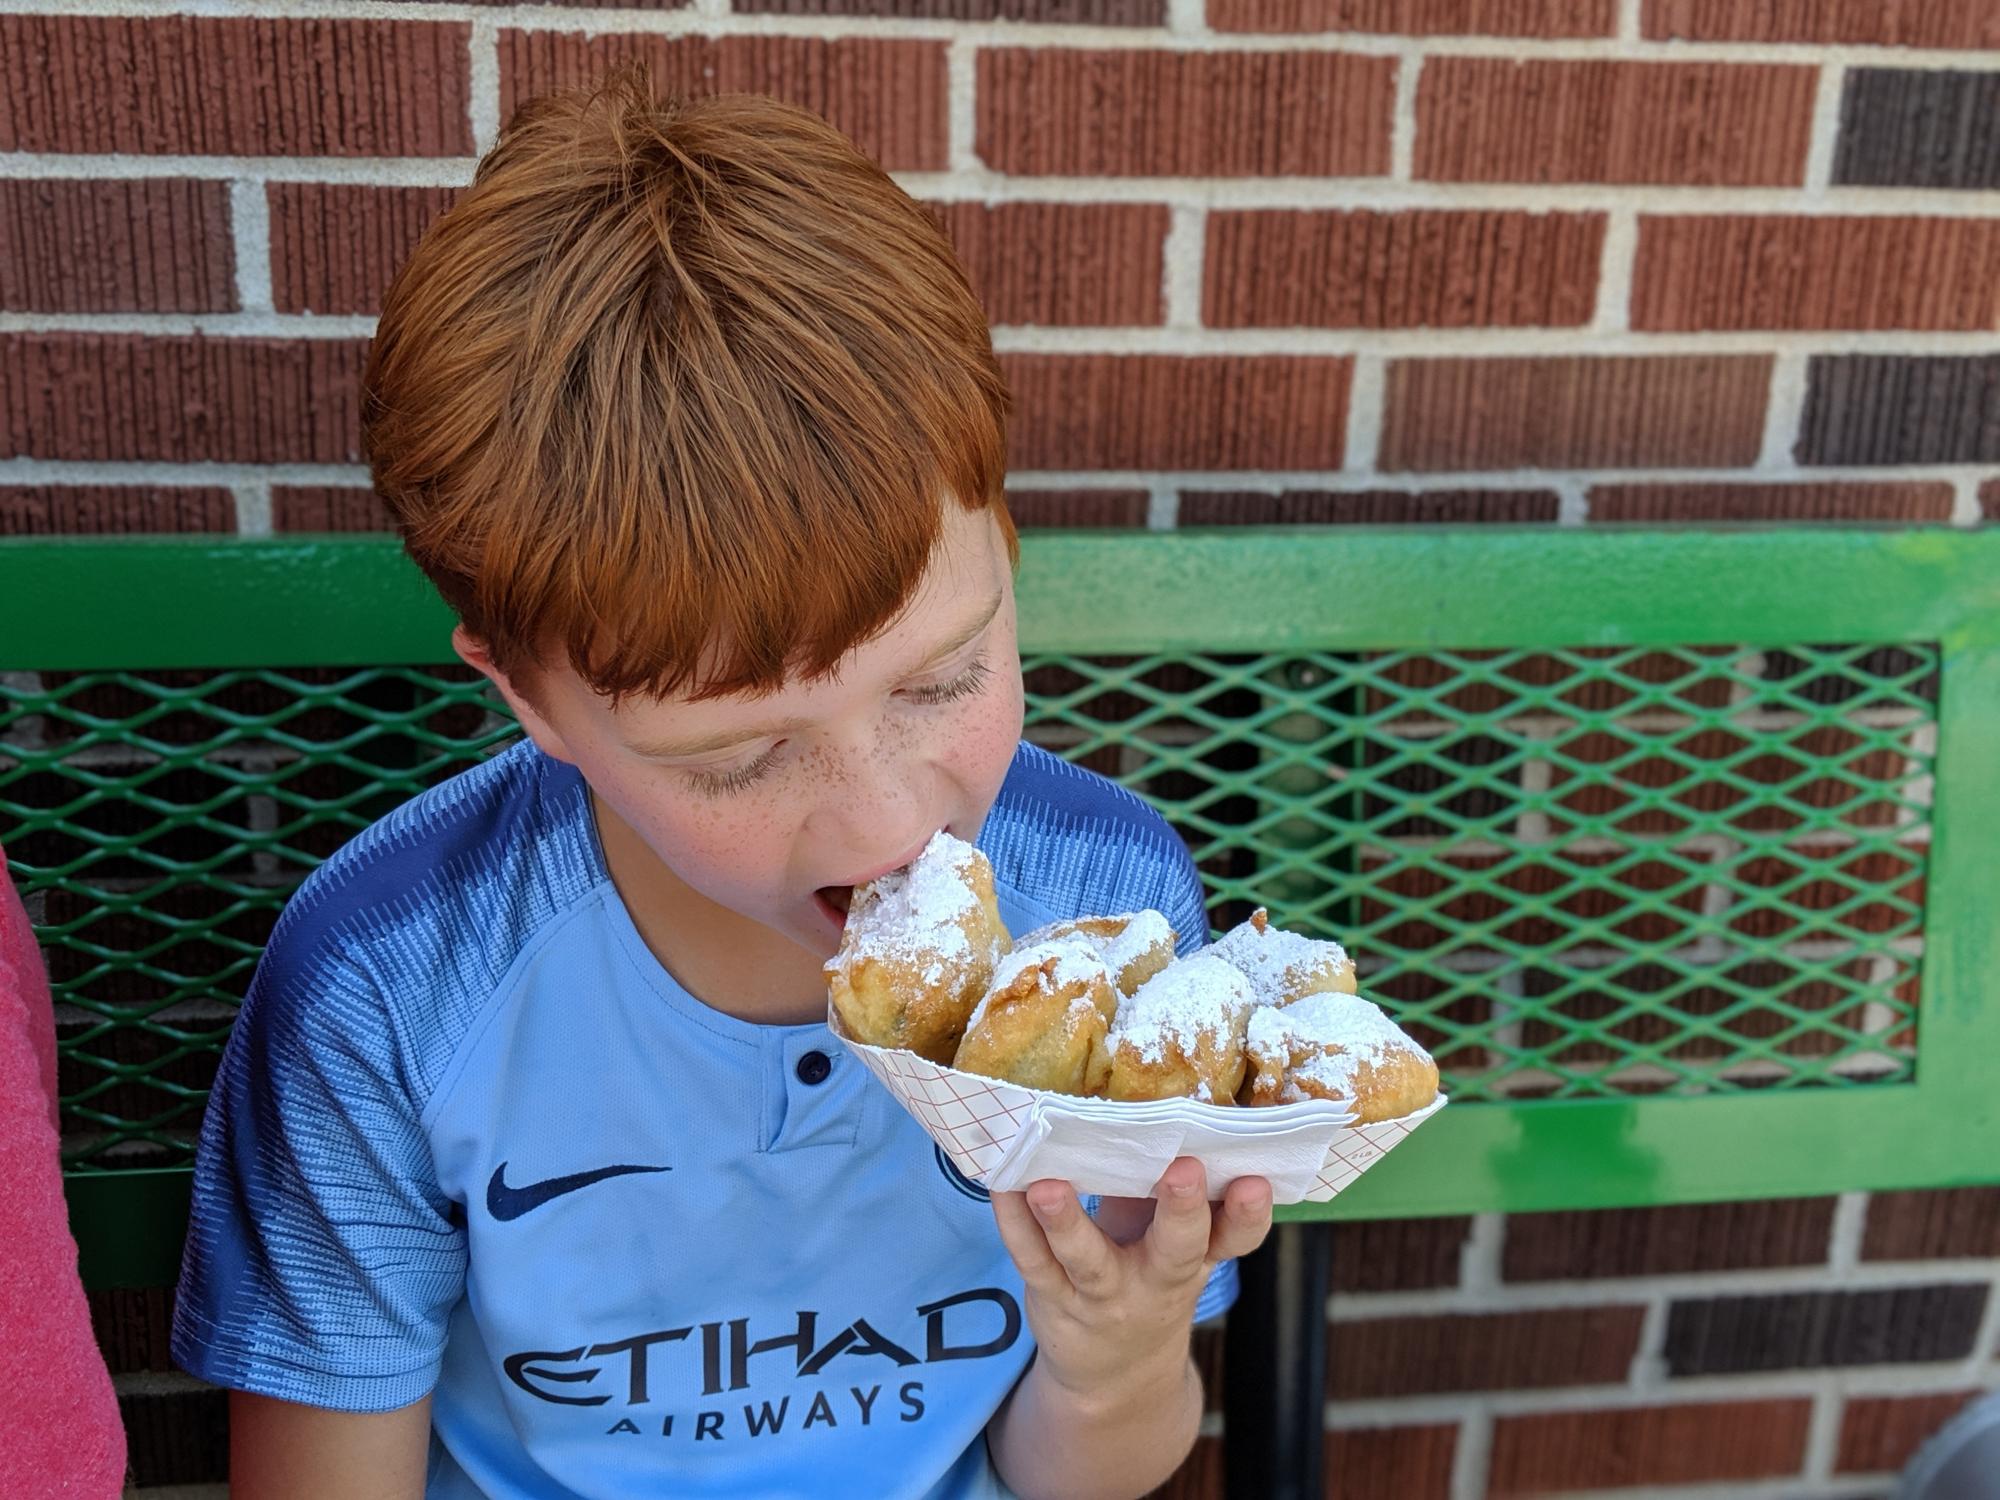 kid eating fried food at the kansas state fair in hutchinson